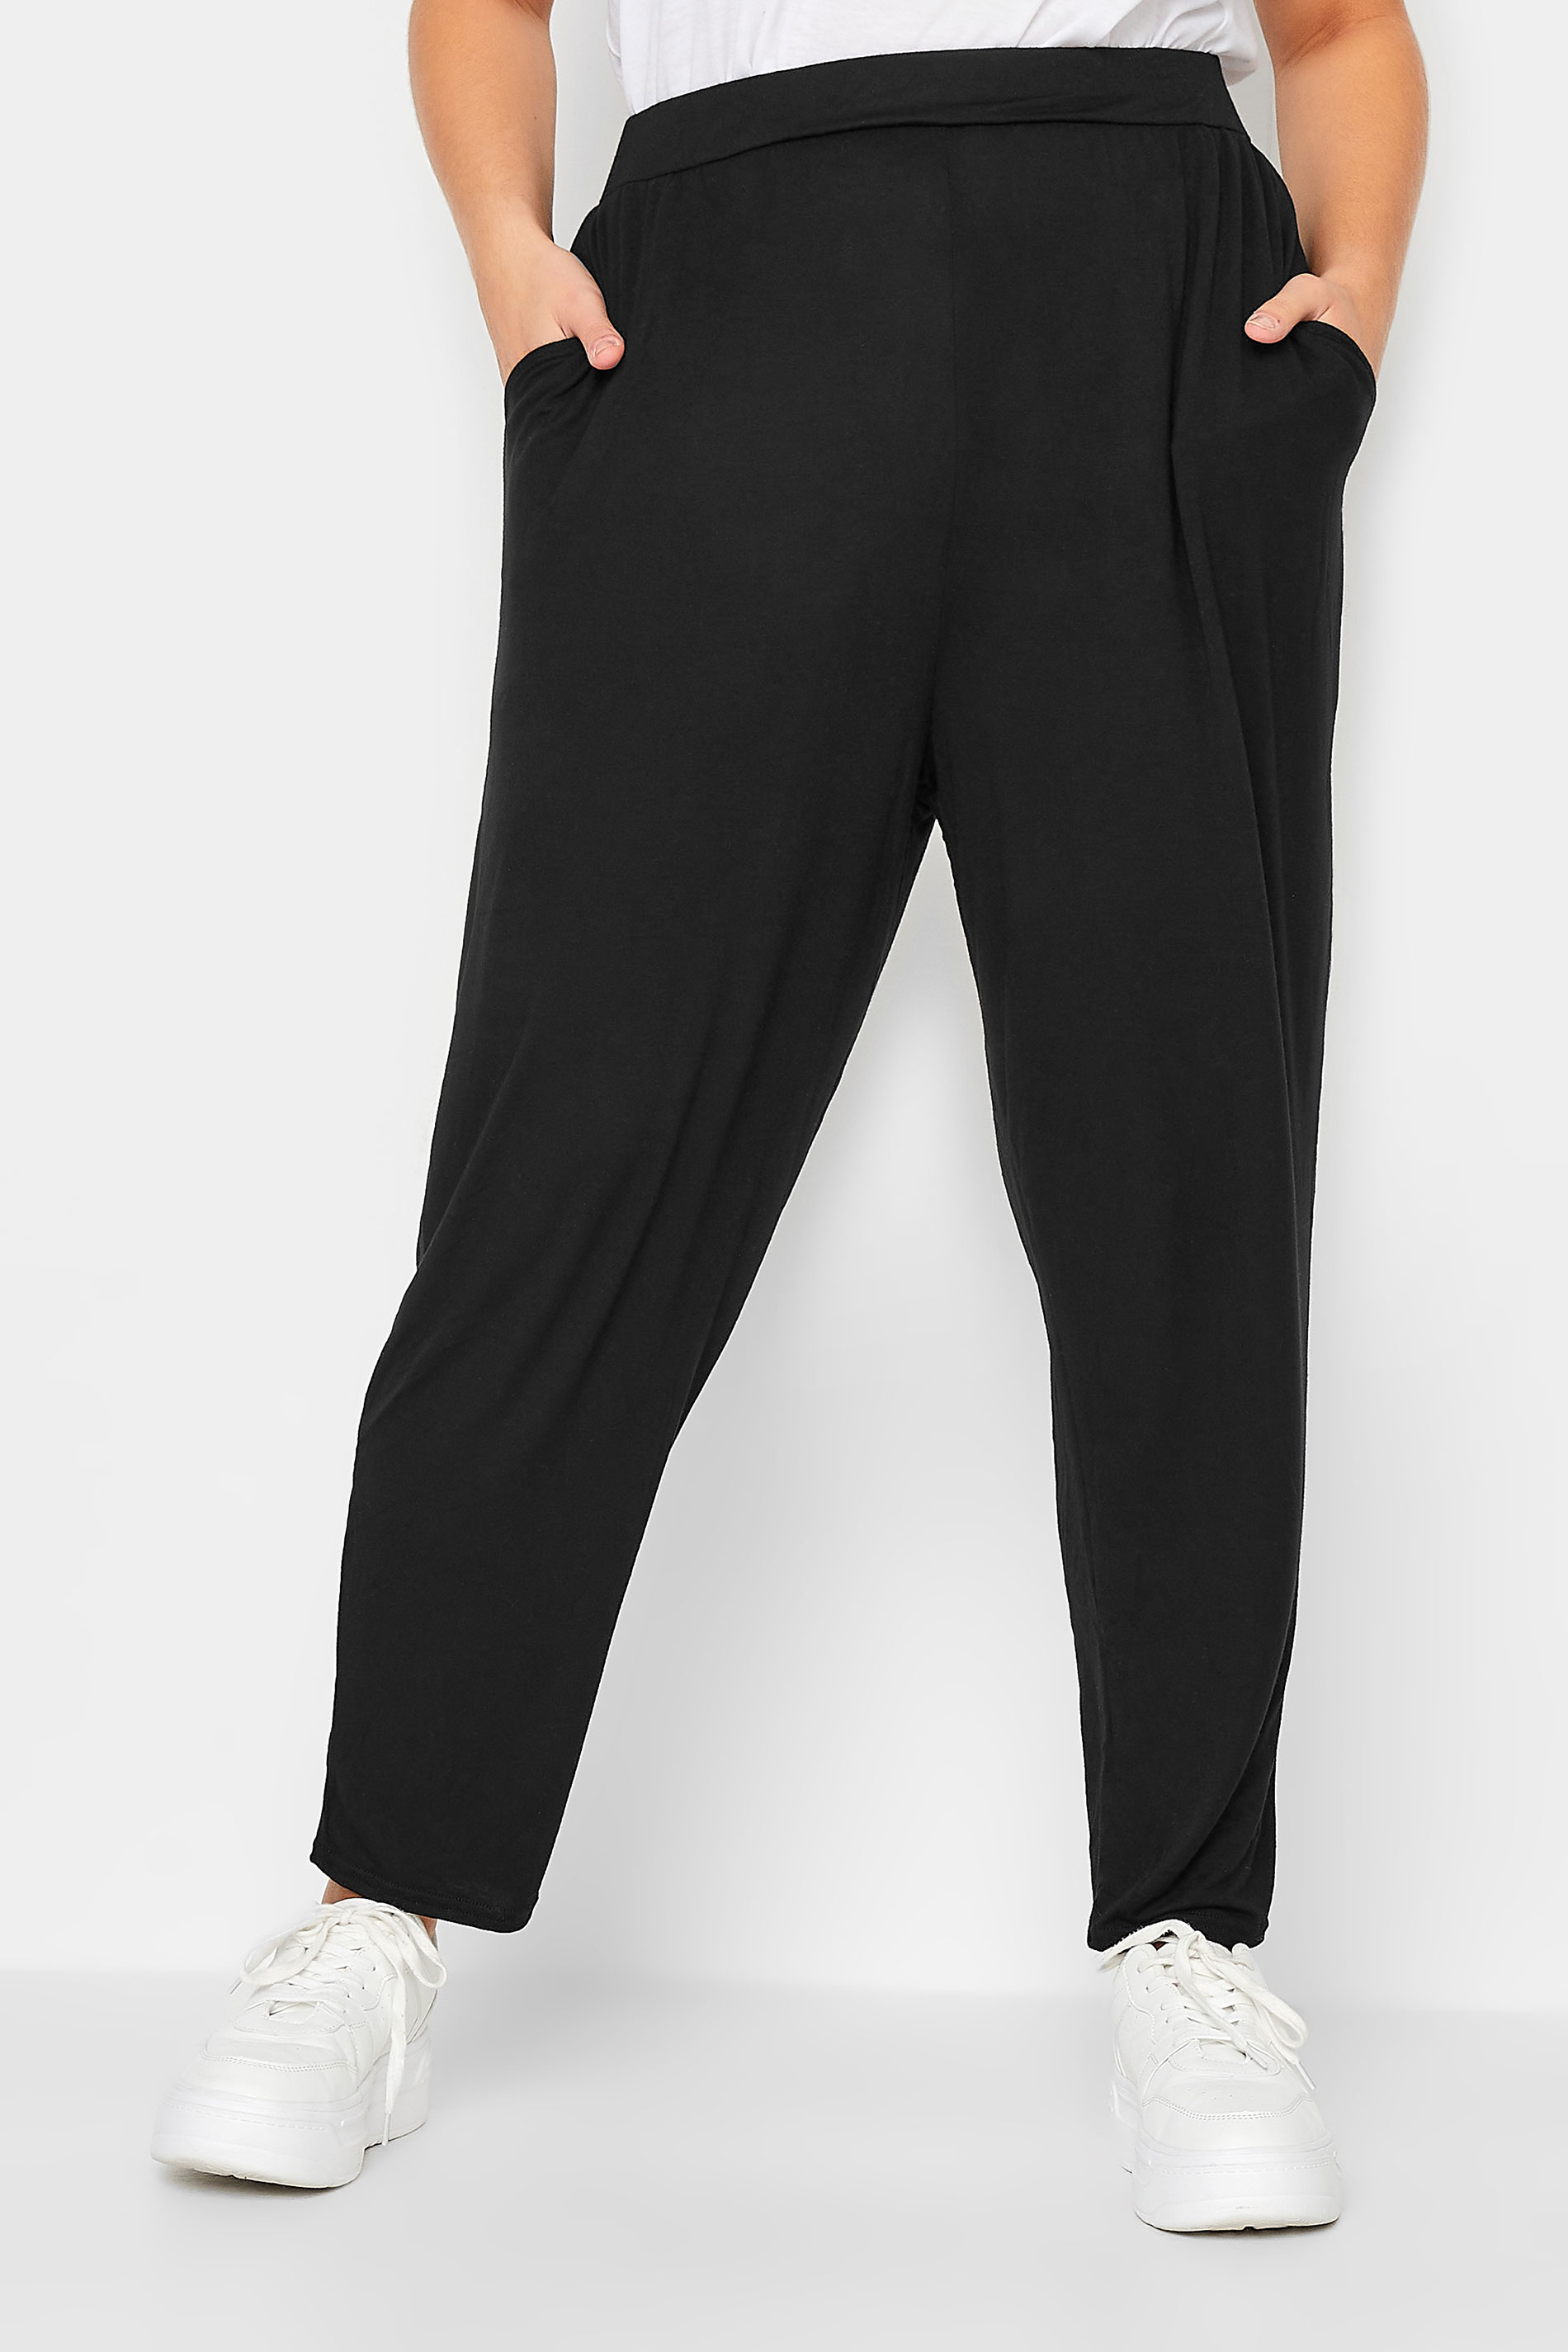 YOURS PETITE Curve Black Stretch Harem Trousers | Yours Clothing 1